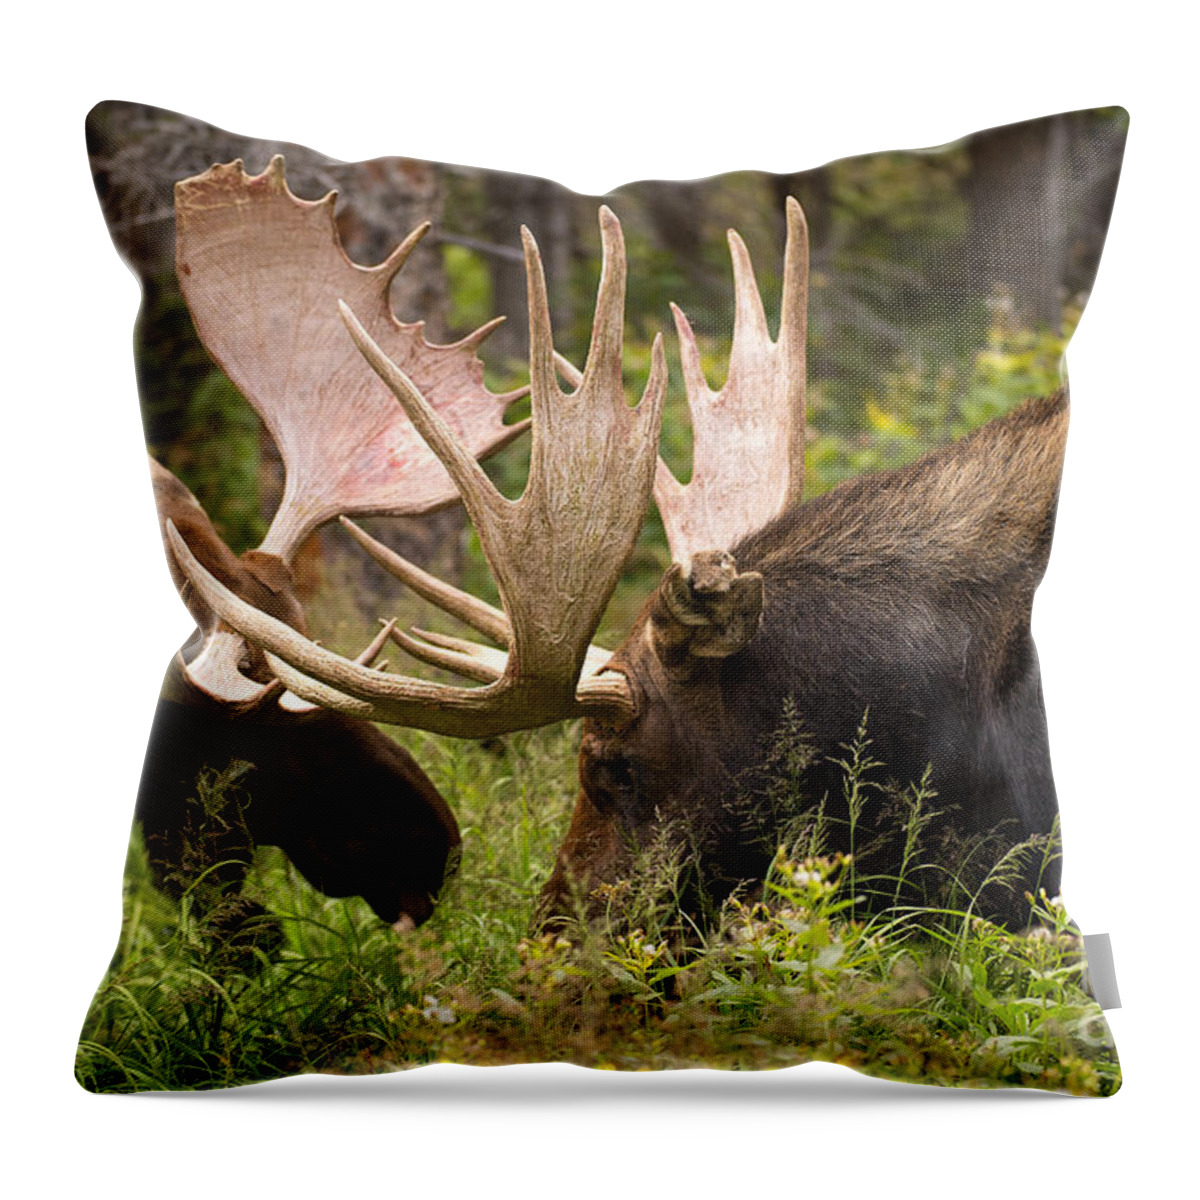 Bull Moose Throw Pillow featuring the photograph Reach Advantage by Aaron Whittemore